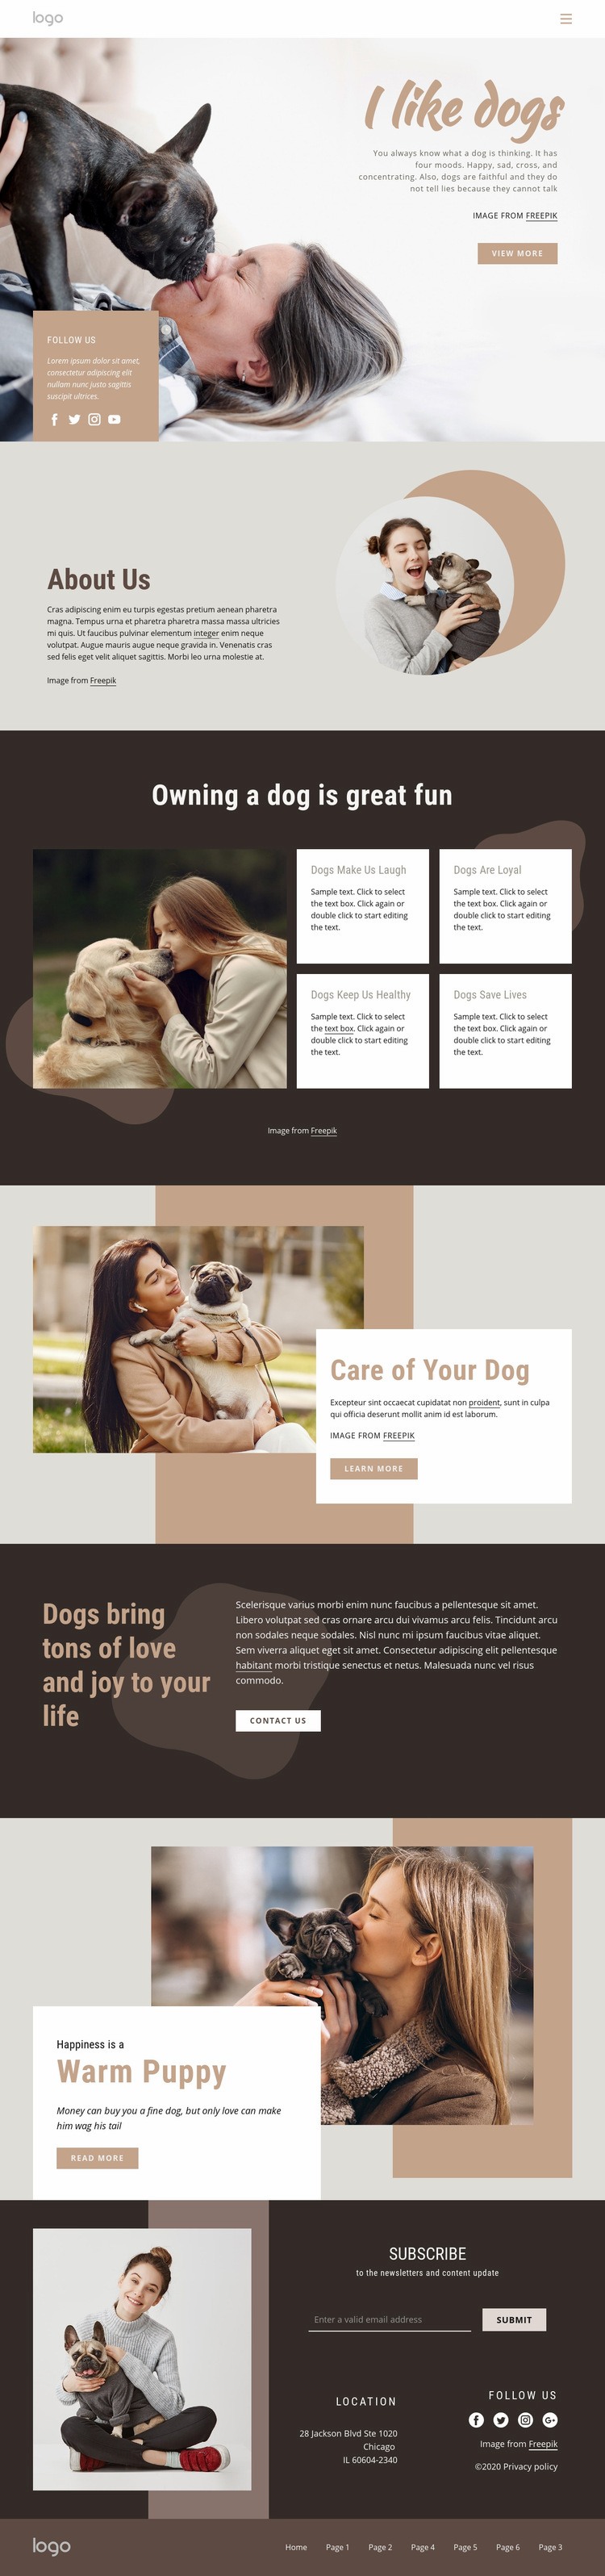 All about dogs Wysiwyg Editor Html 